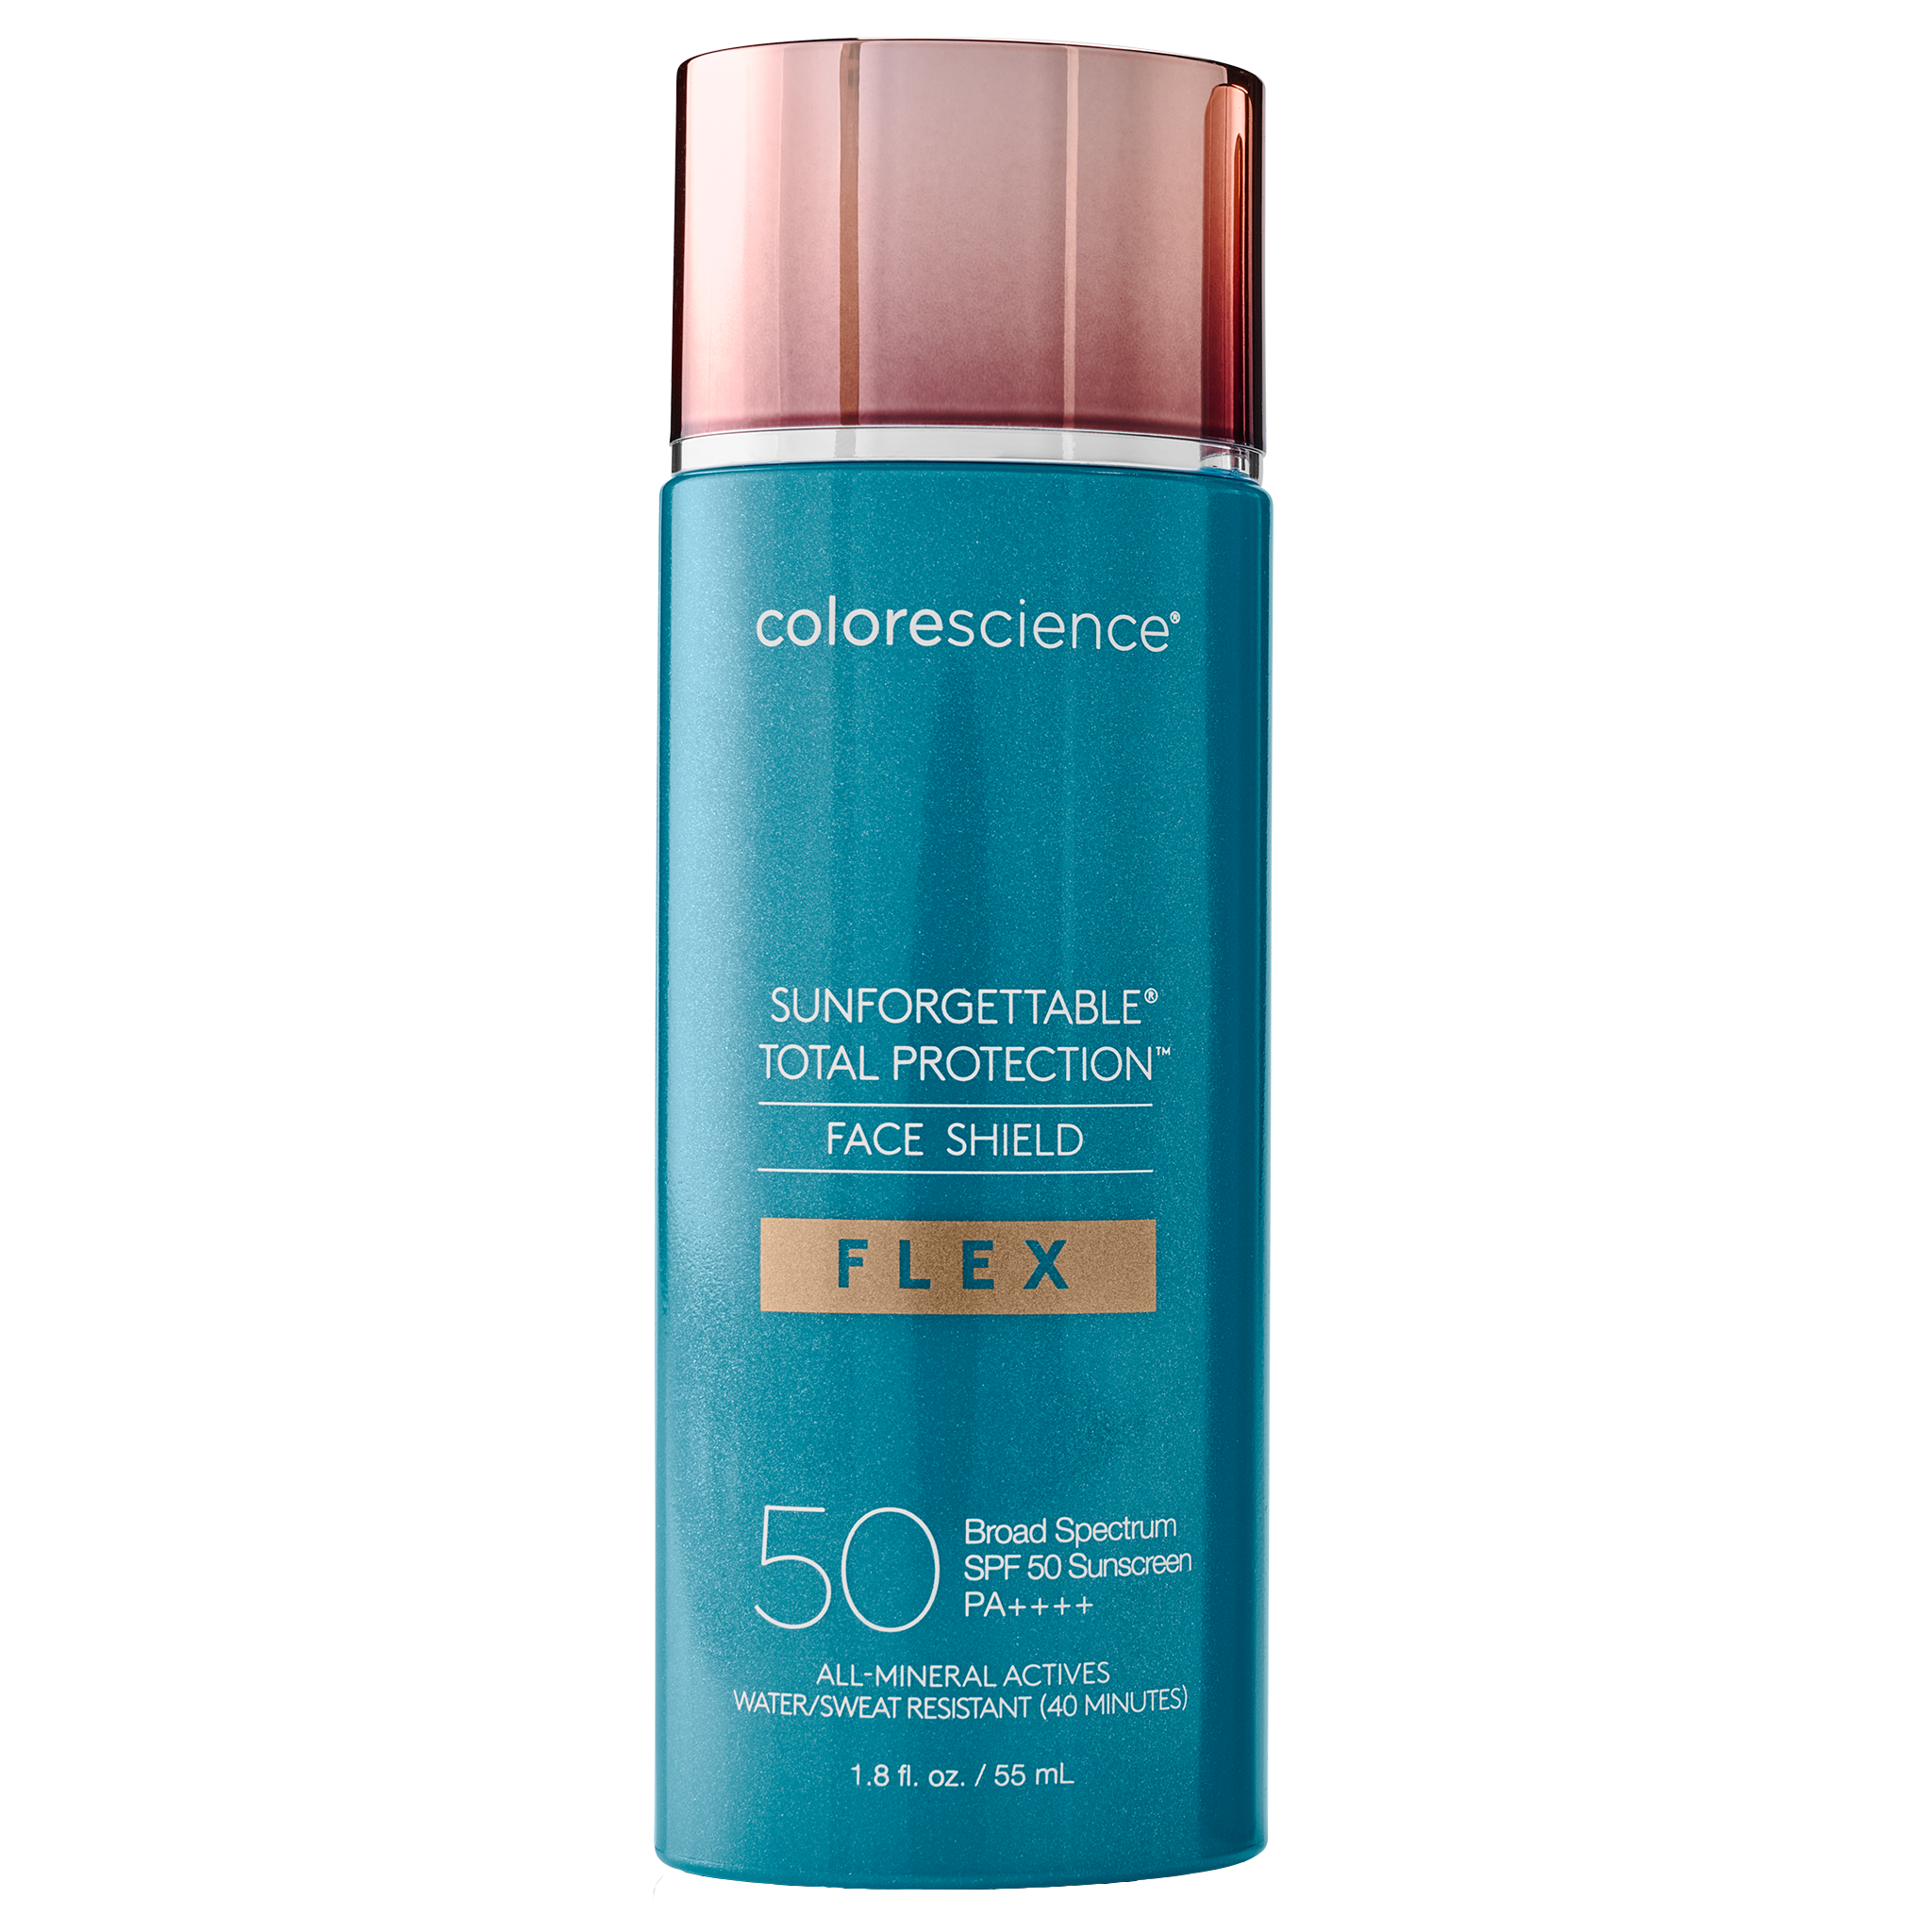 Image of Sunforgettable® Total Protection® Face Shield Flex SPF 50